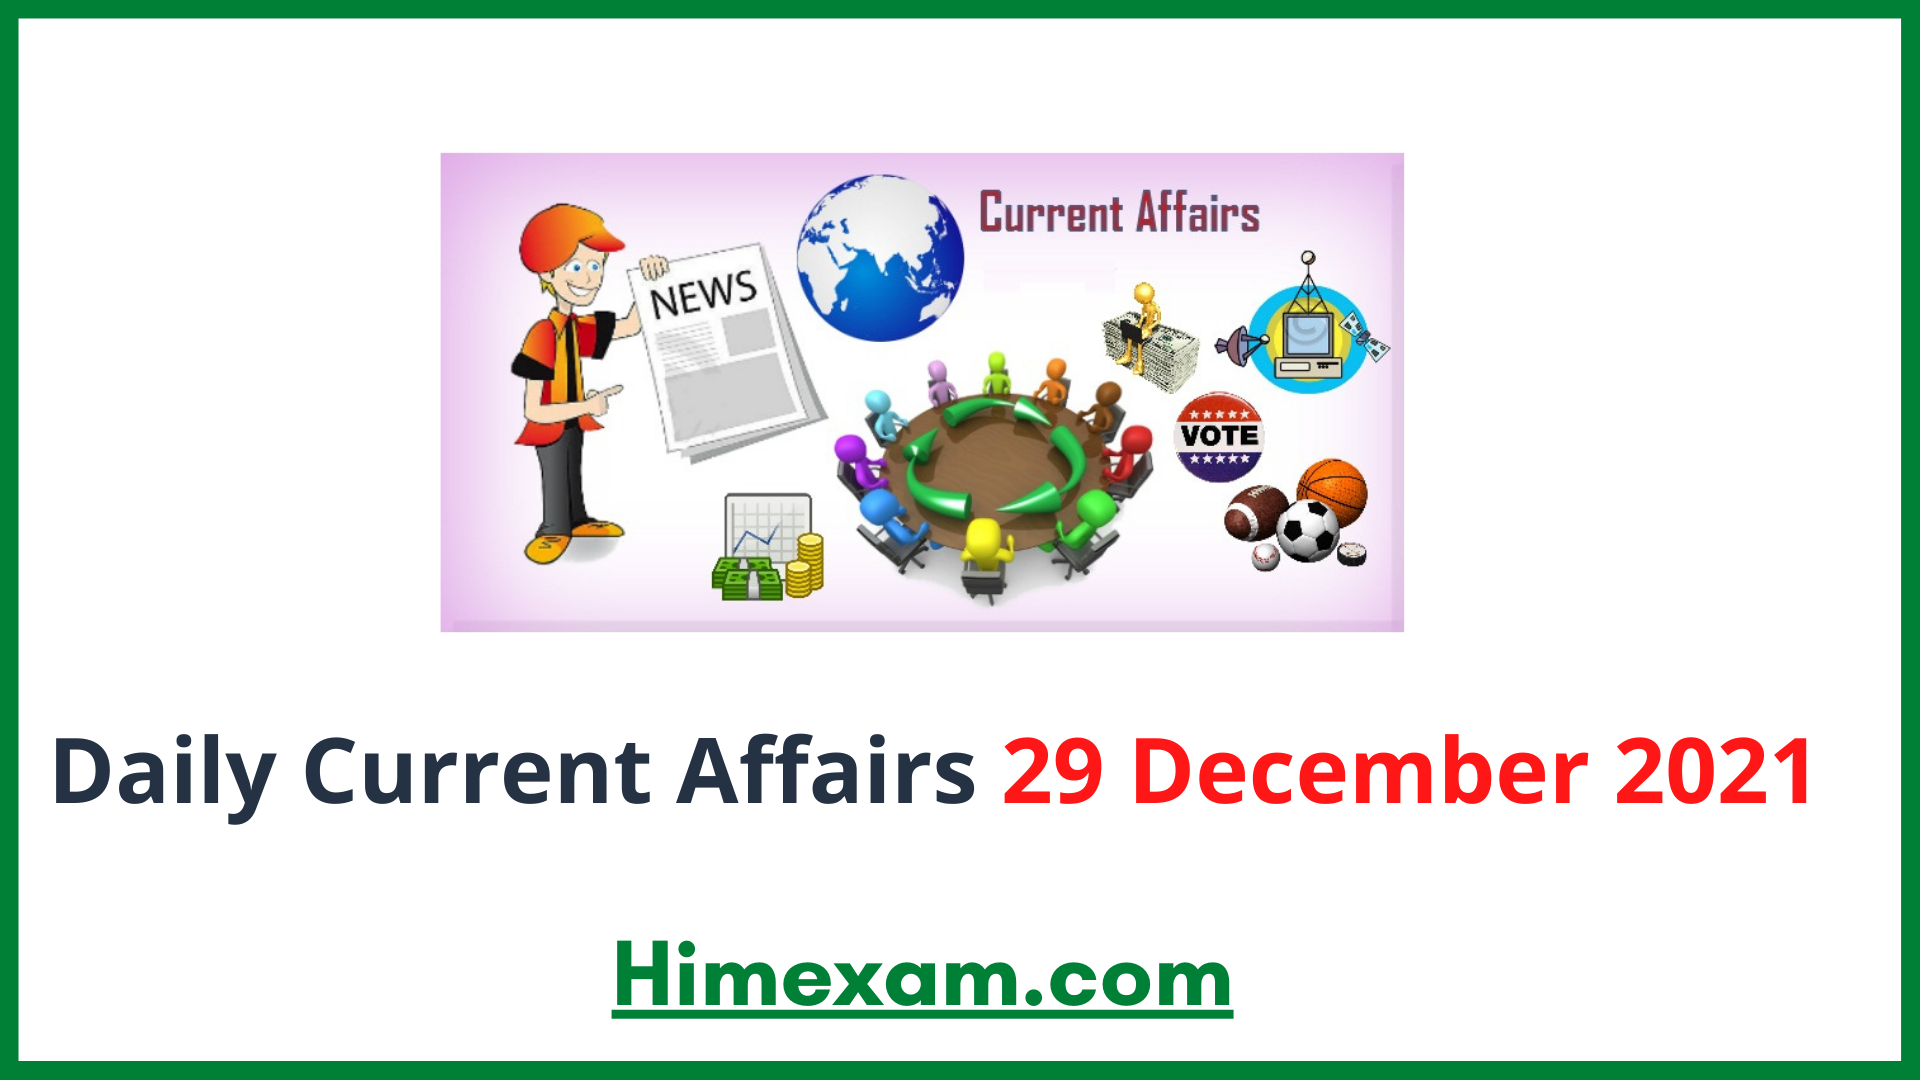 Daily Current Affairs 29 December 2021